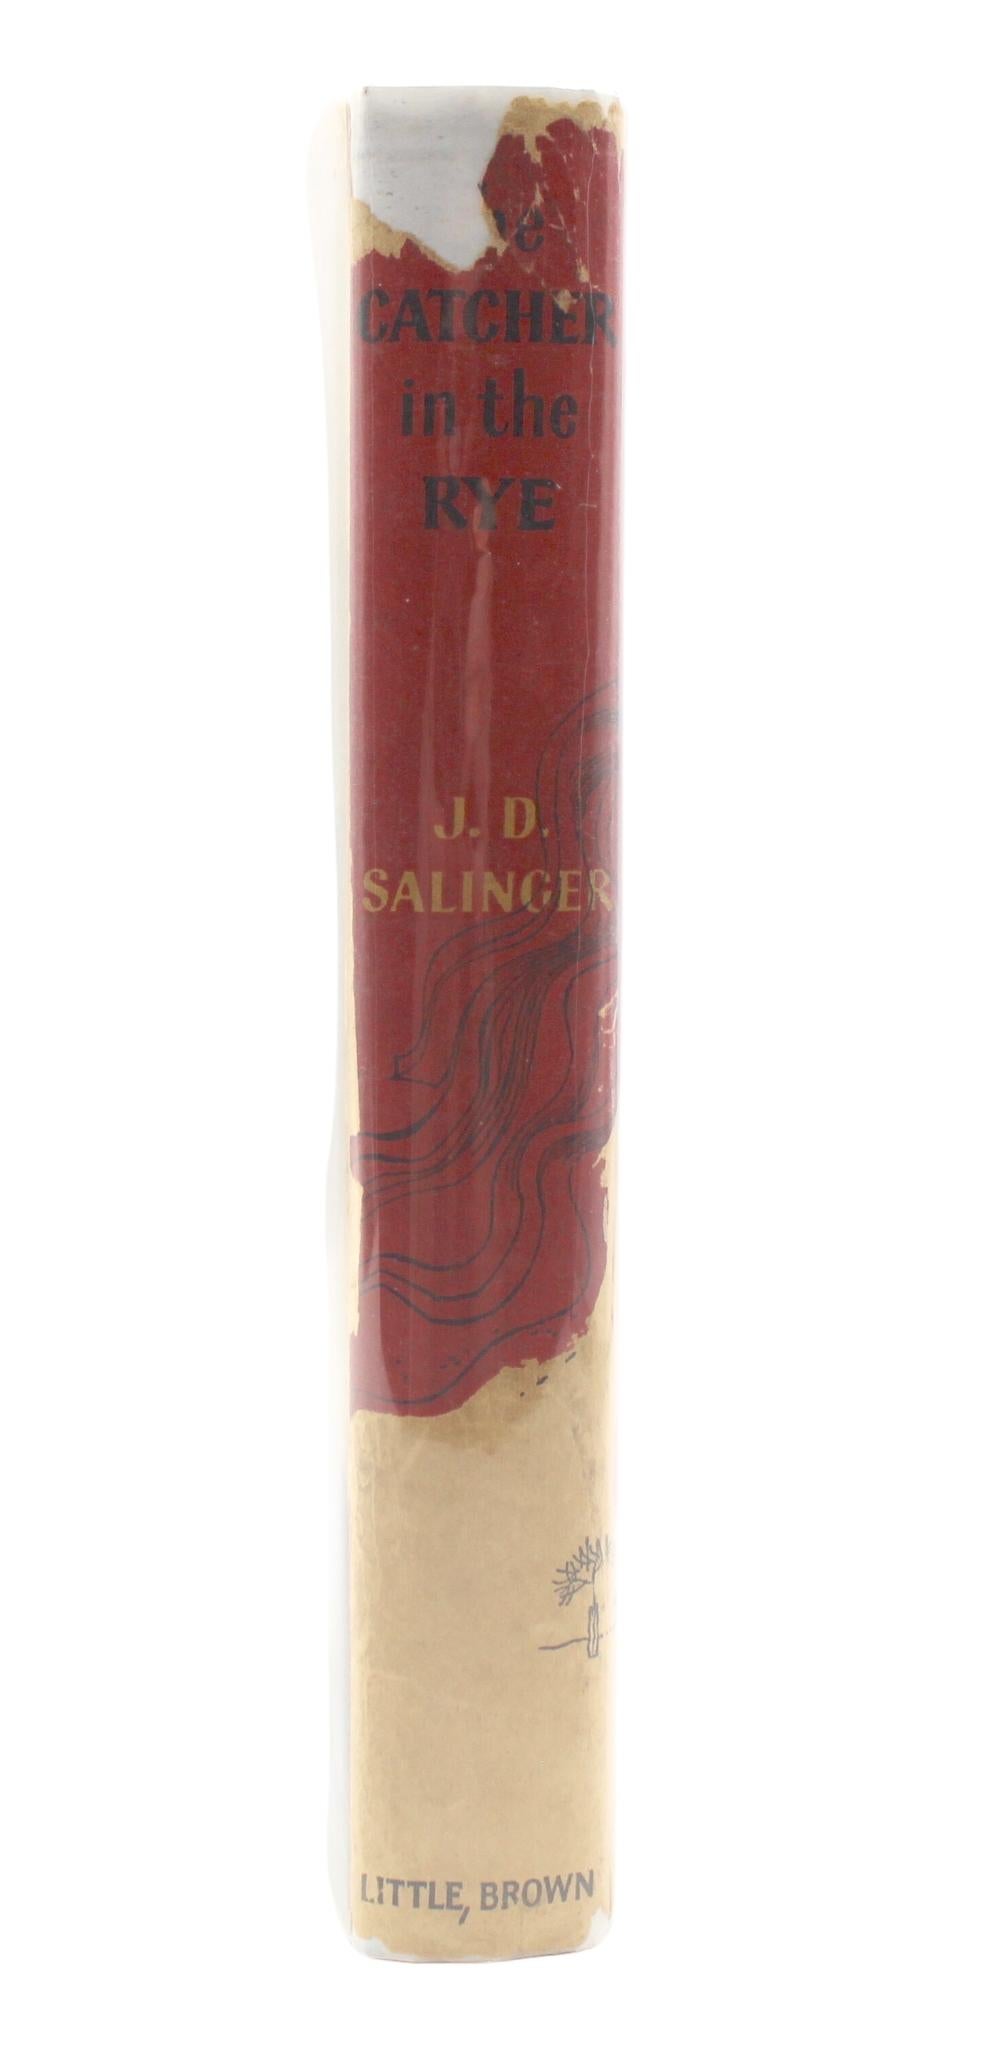 Paper Catcher in the Rye by J.D. Salinger, First Edition, in Dust Jacket, 1951 For Sale